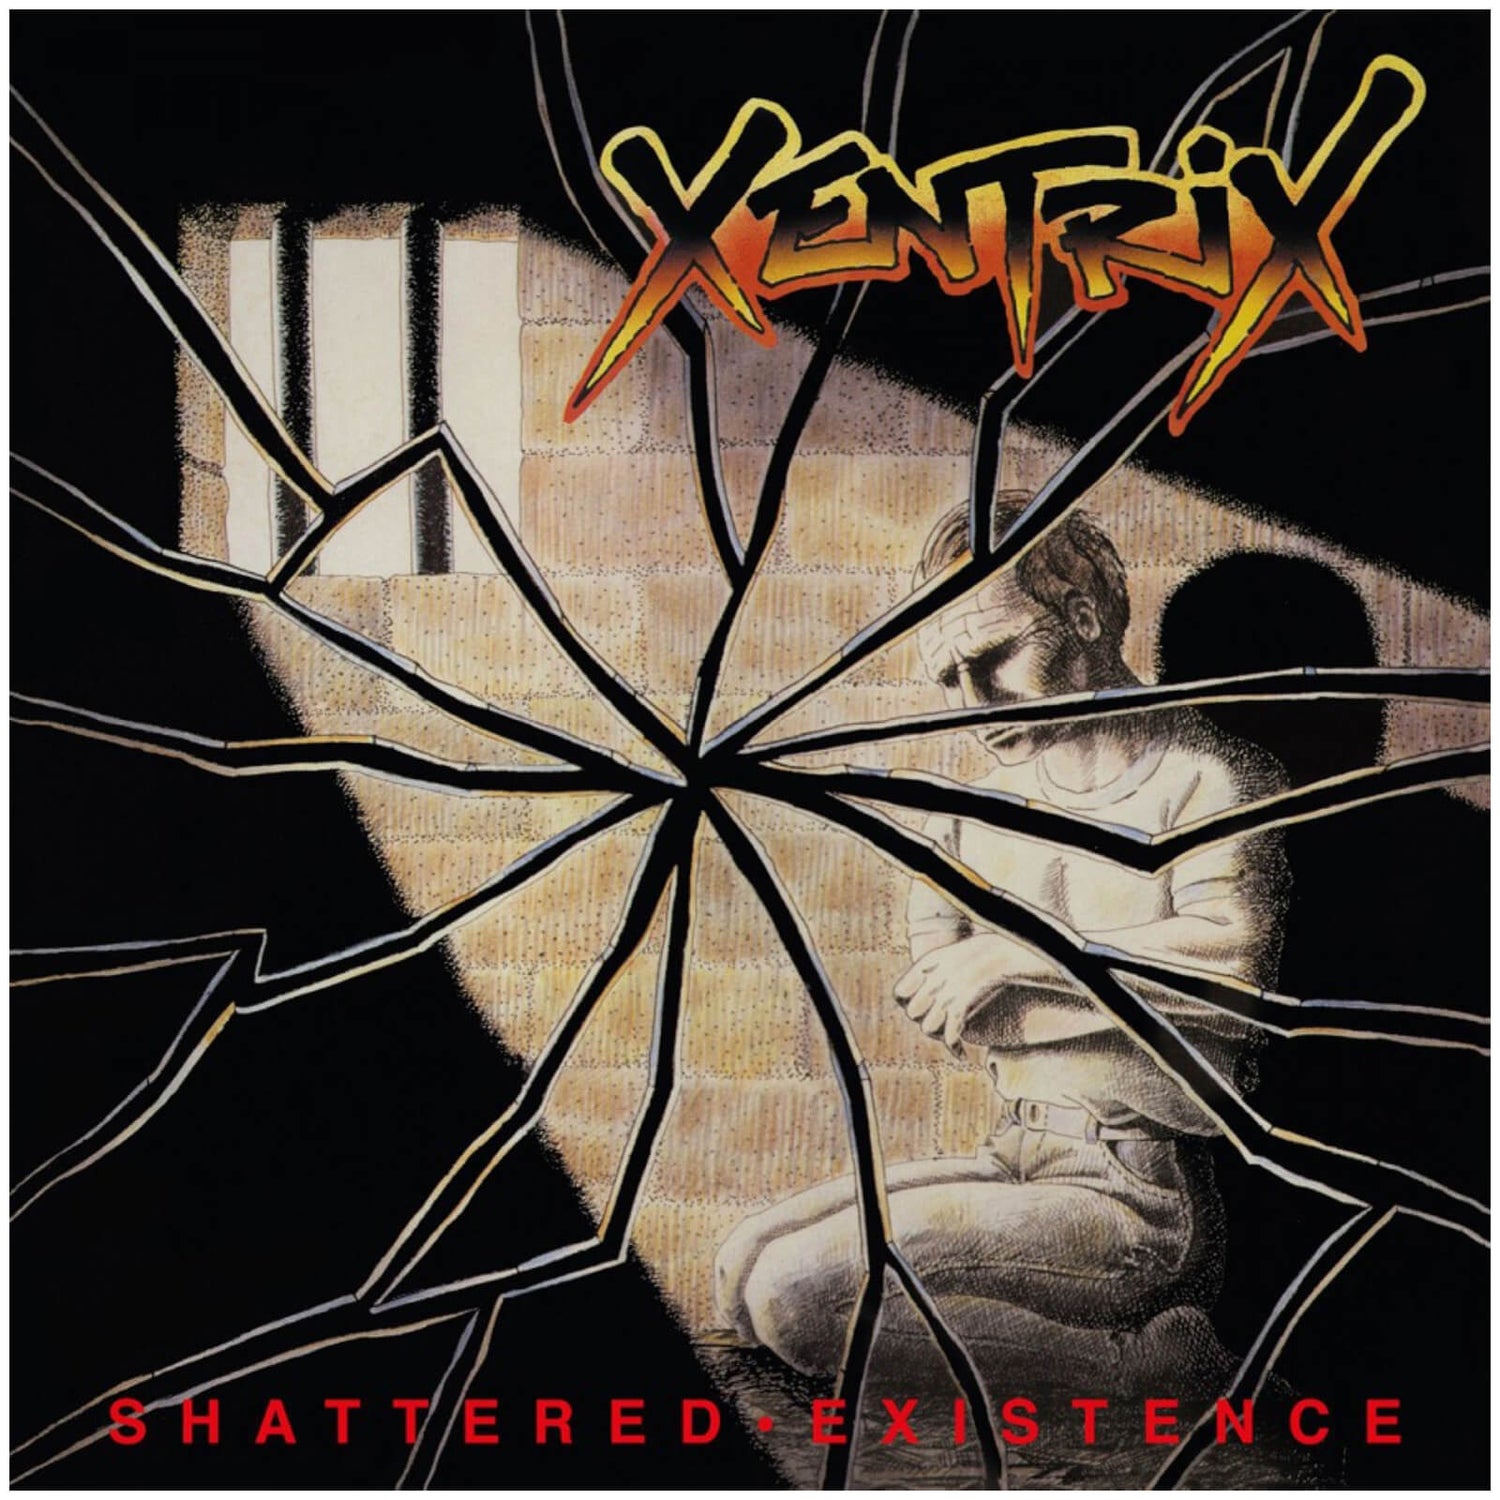 Xentrix - Shattered Existence 180g Vinyl (Translucent Red)